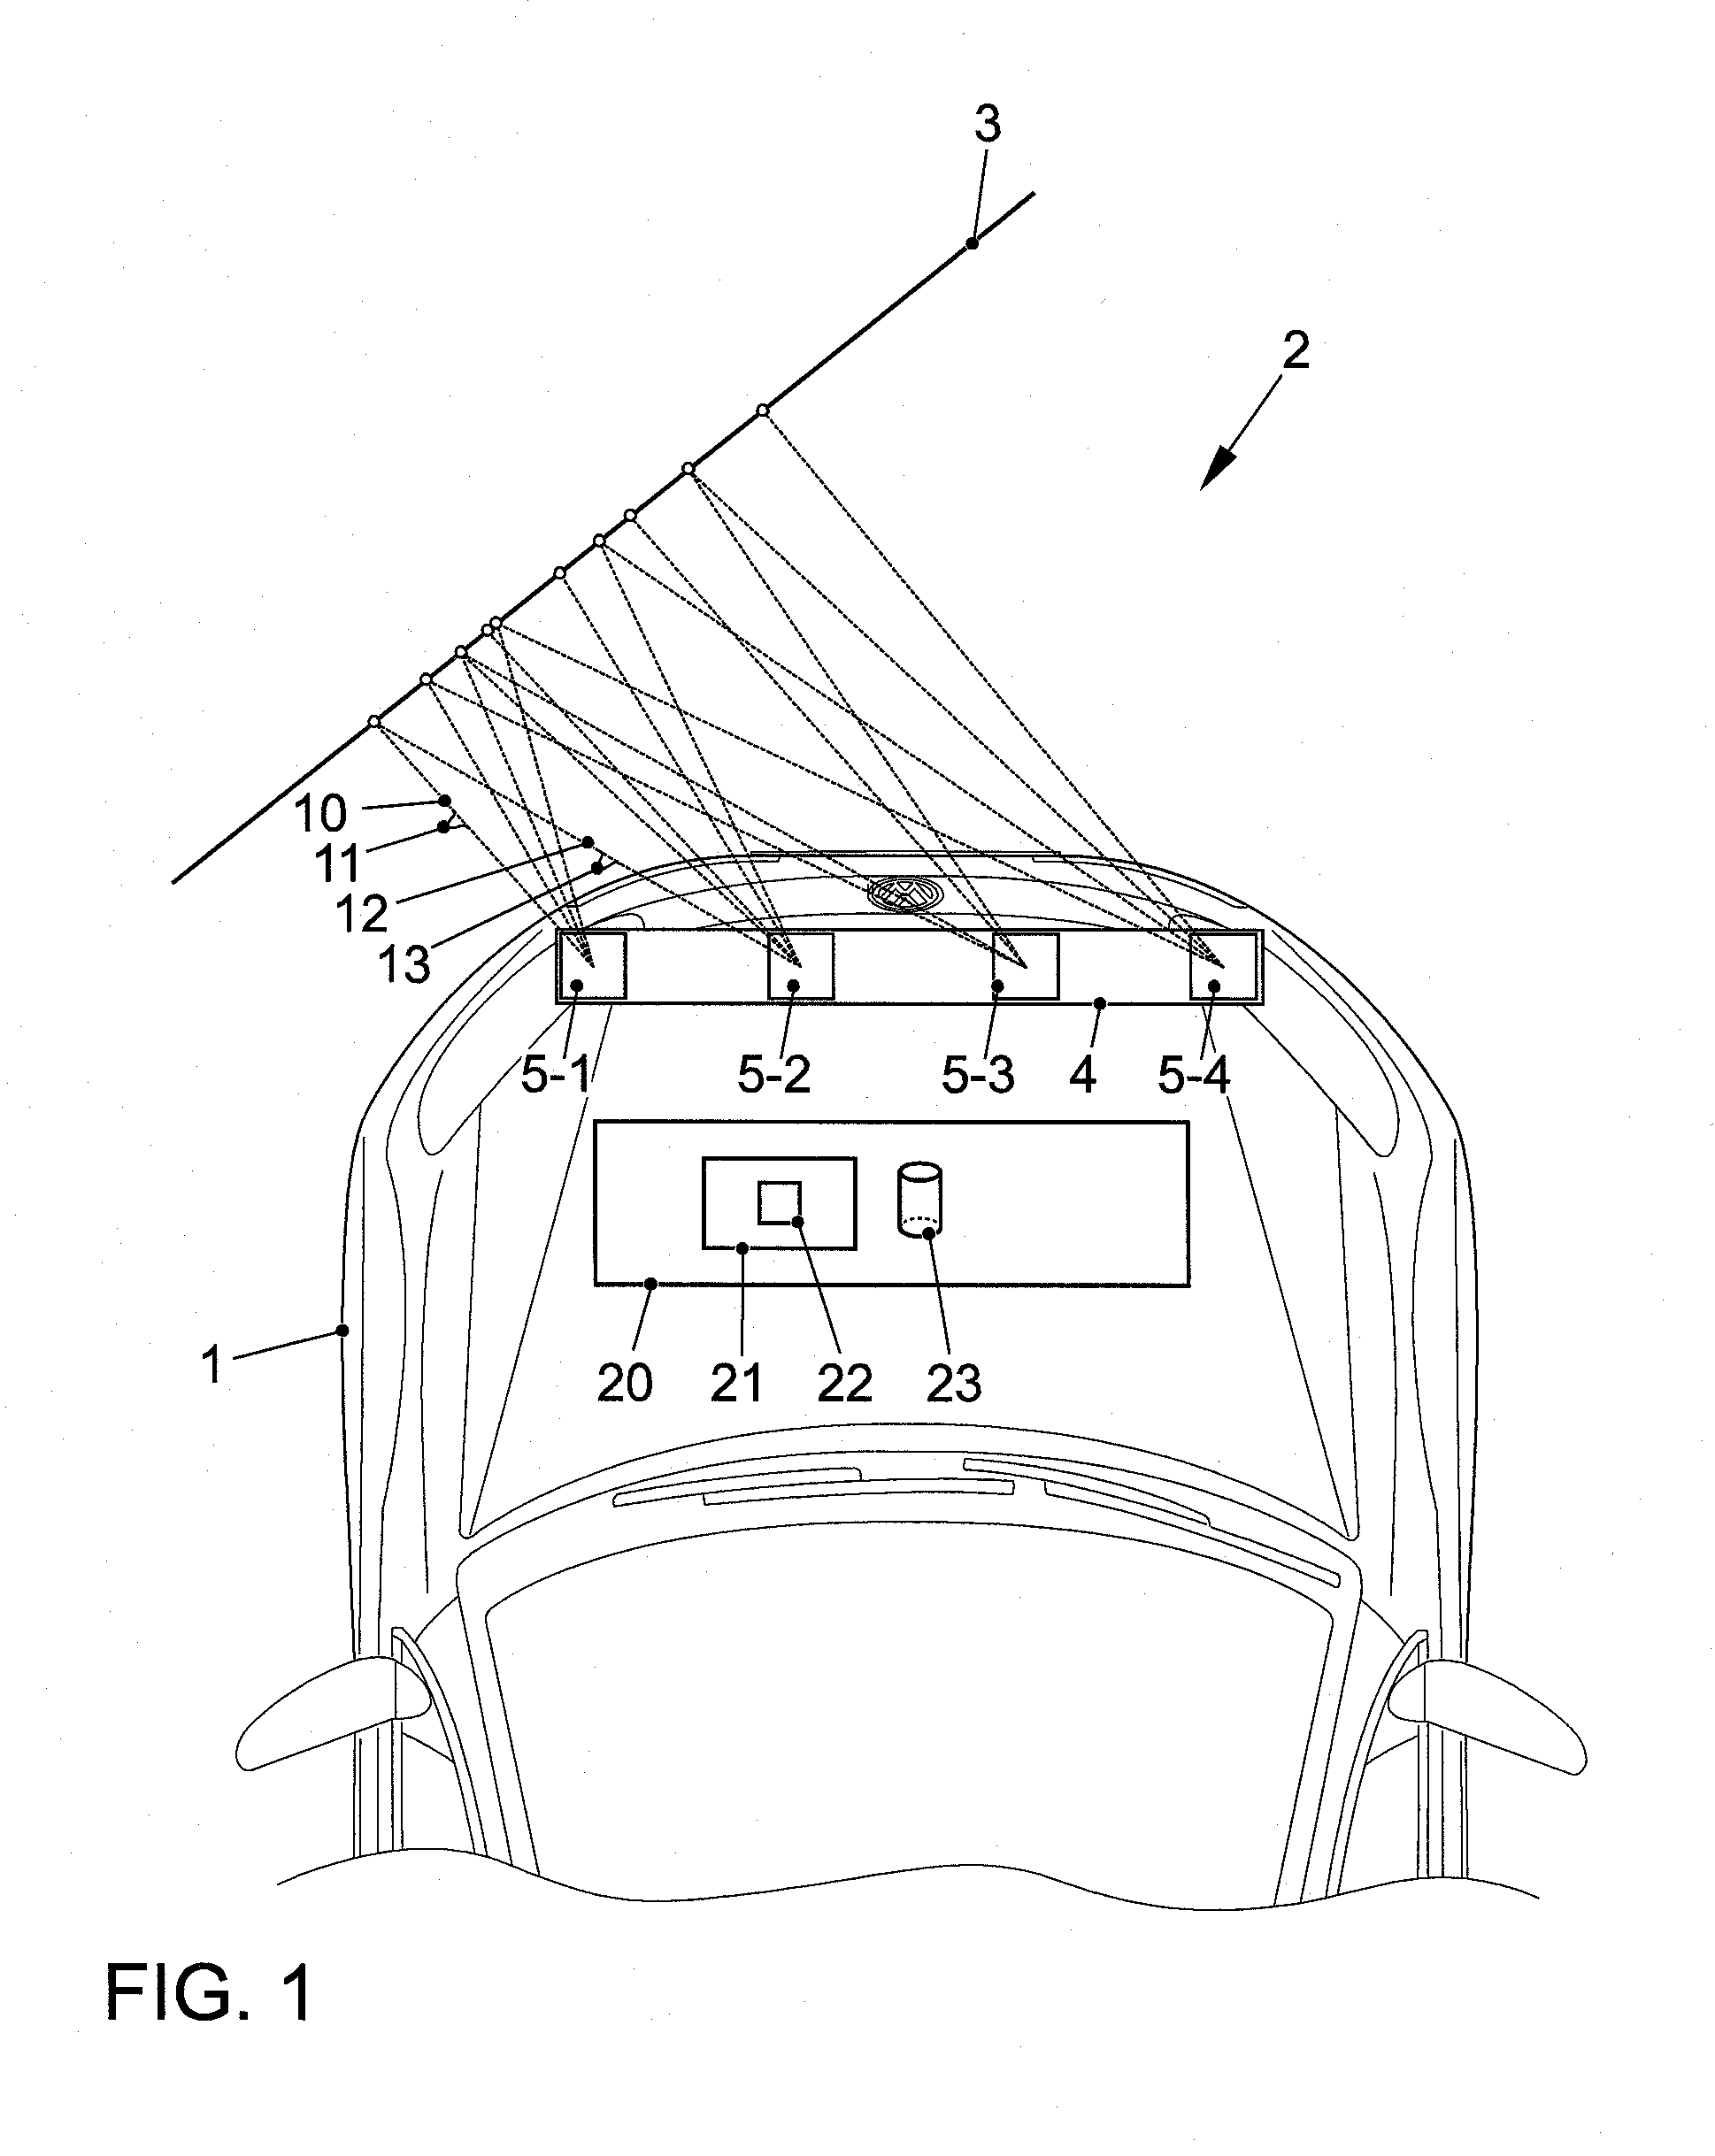 Method and device for detecting objects in the surroundings of a vehicle